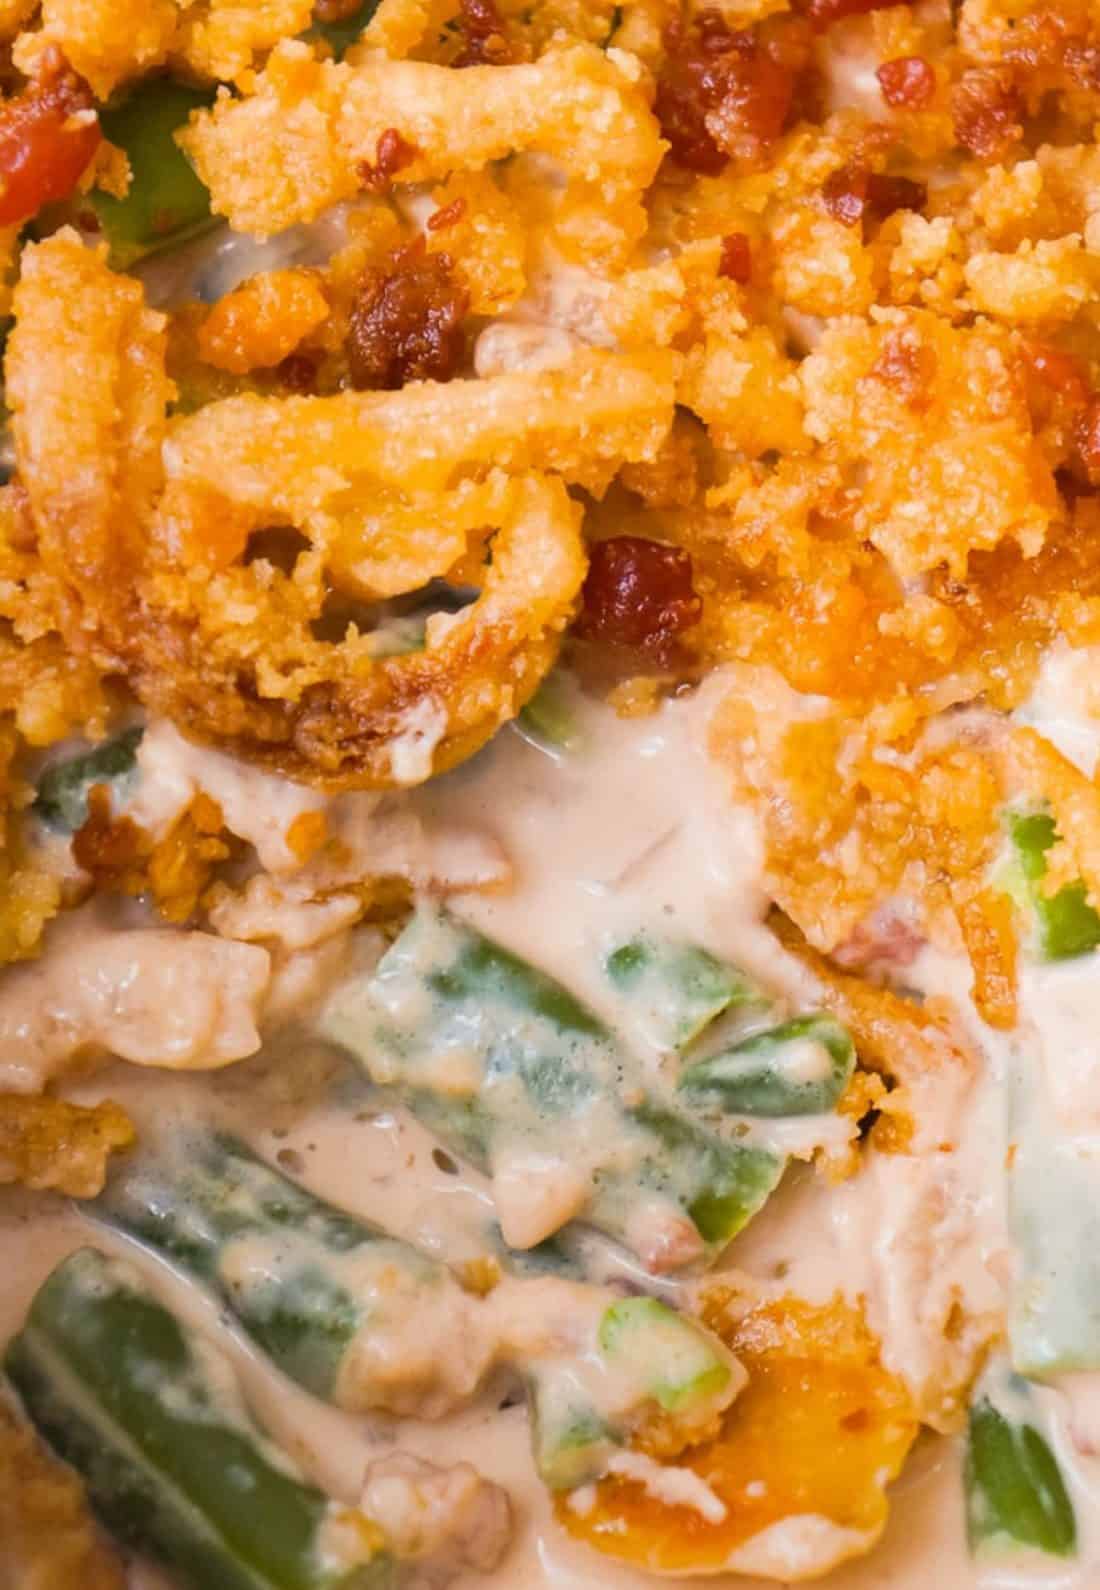 Cream Cheese & Bacon Green Bean Casserole - THIS IS NOT DIET FOOD